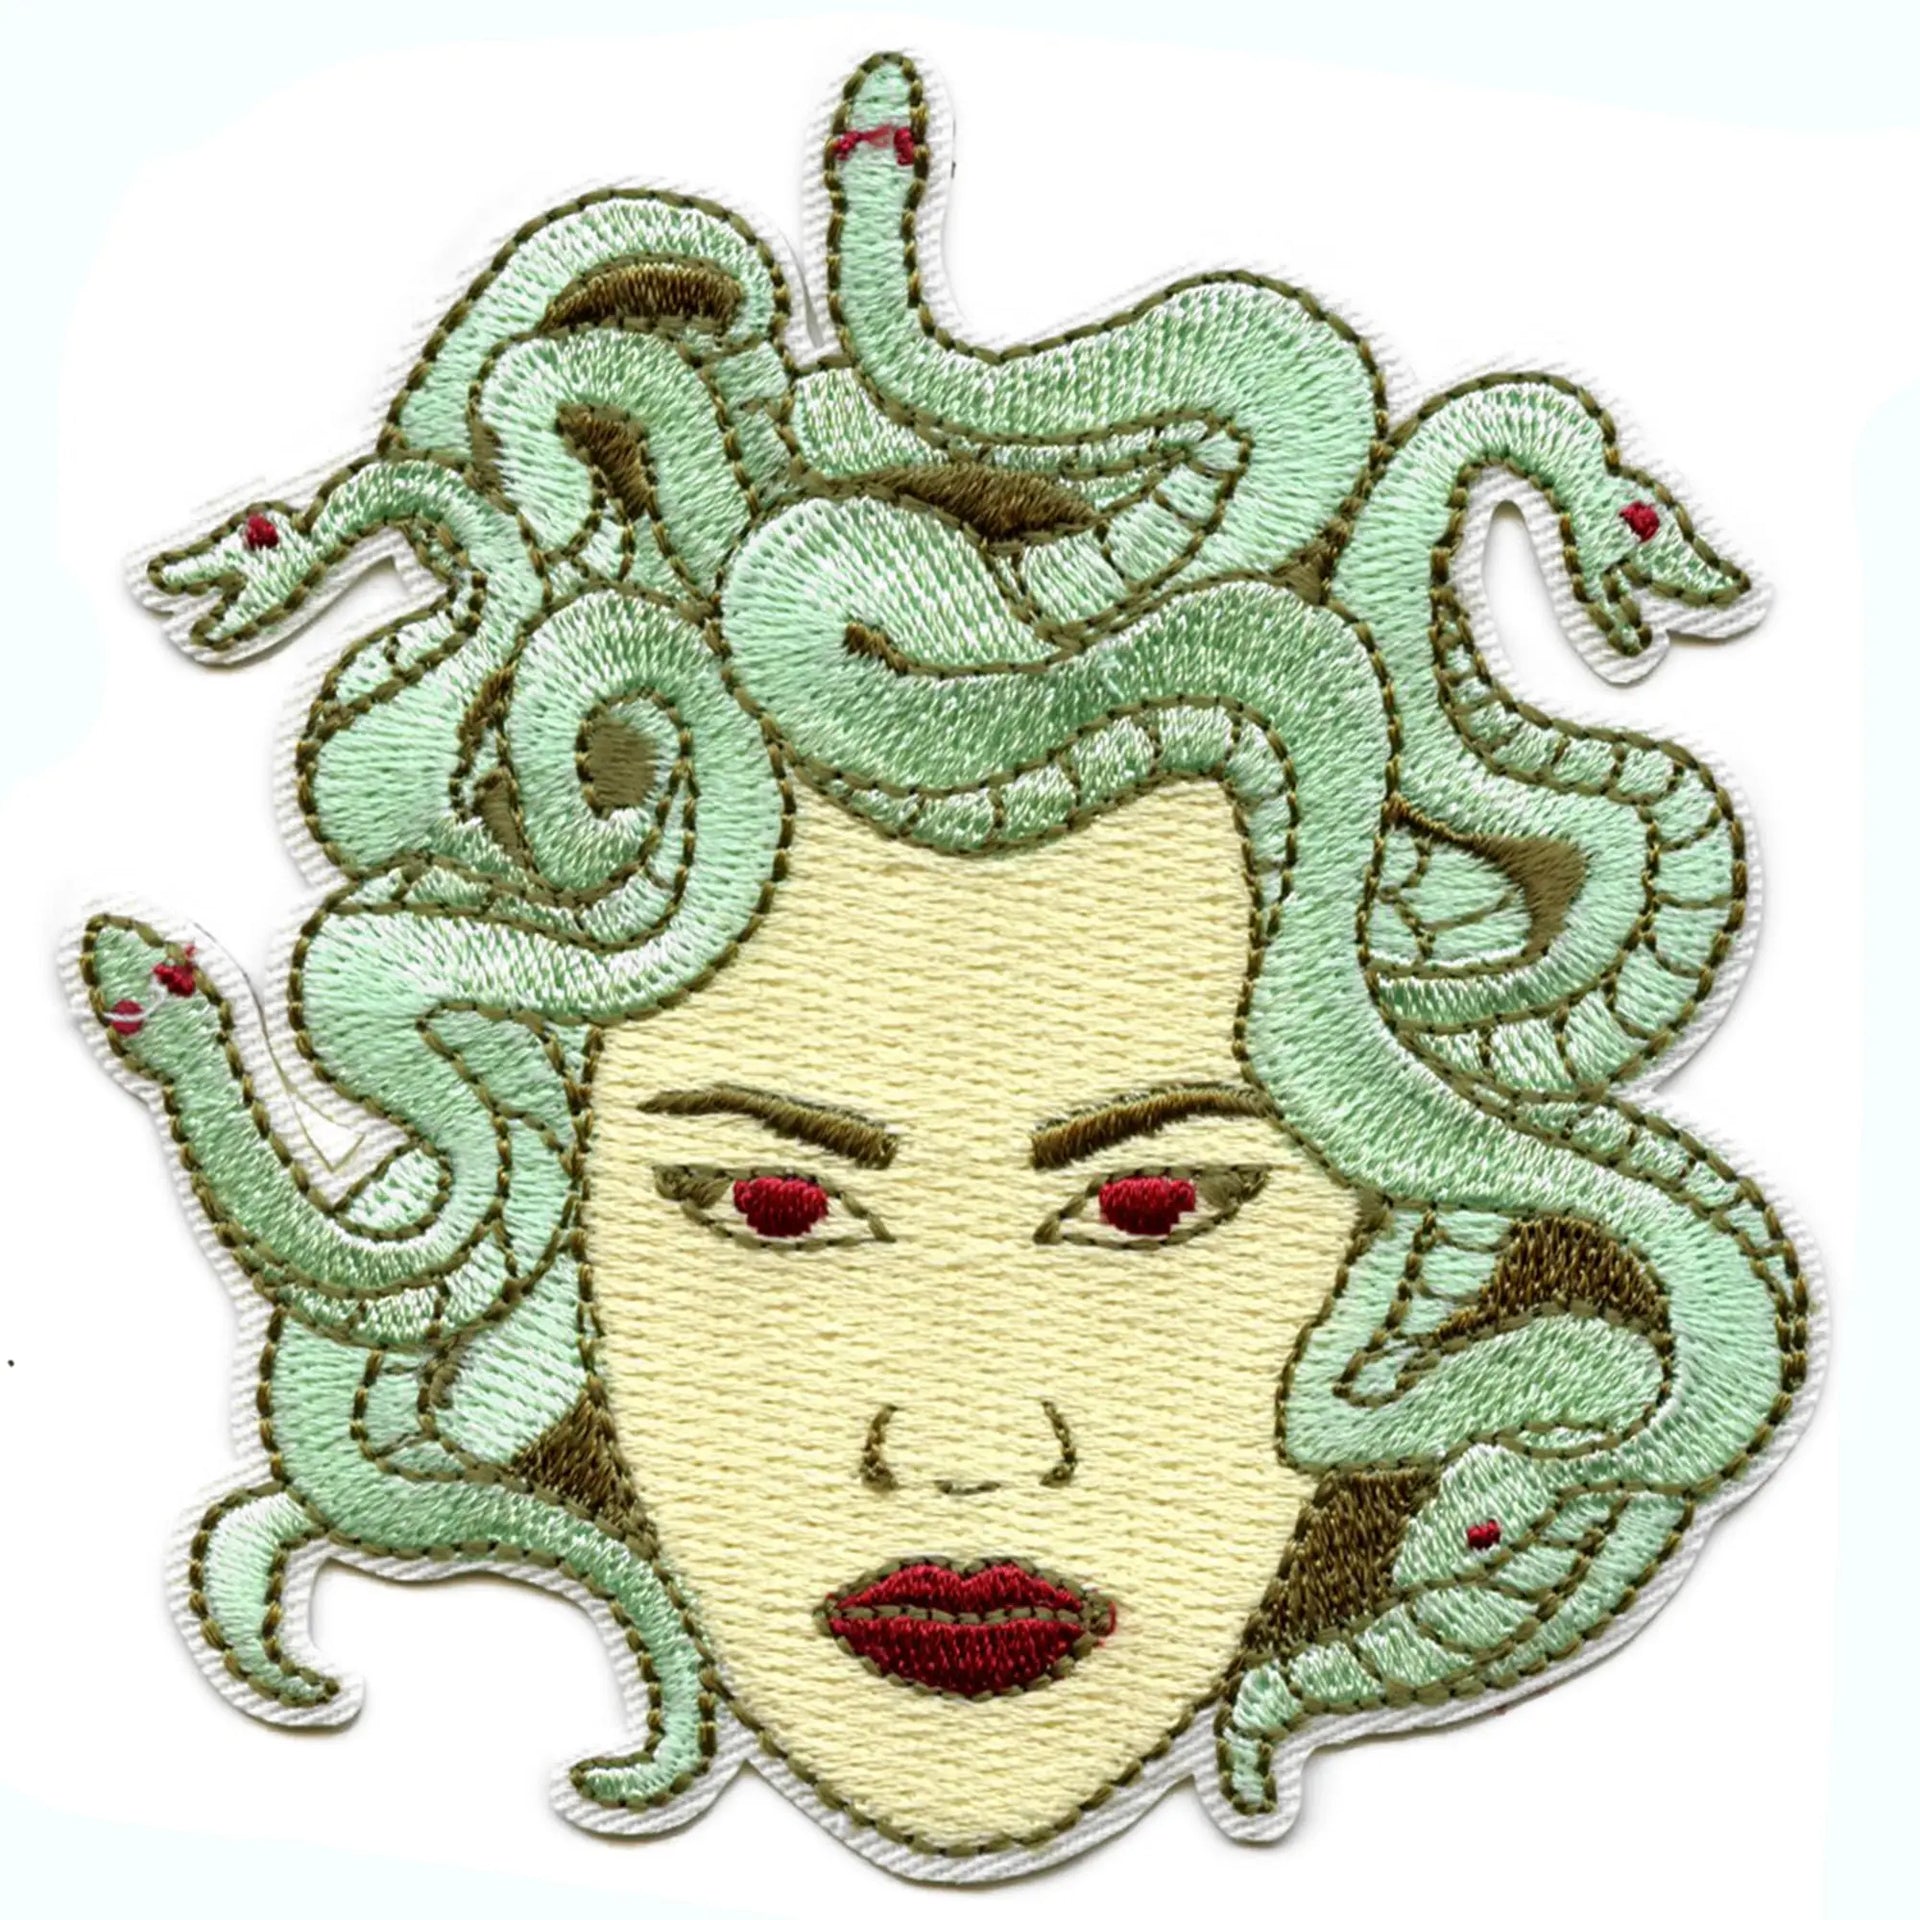 Medusa Snakes Mythology 5 Embroidered Patch DIY Iron or Sew-on Decorative  Vacation Travel Souvenir Applique